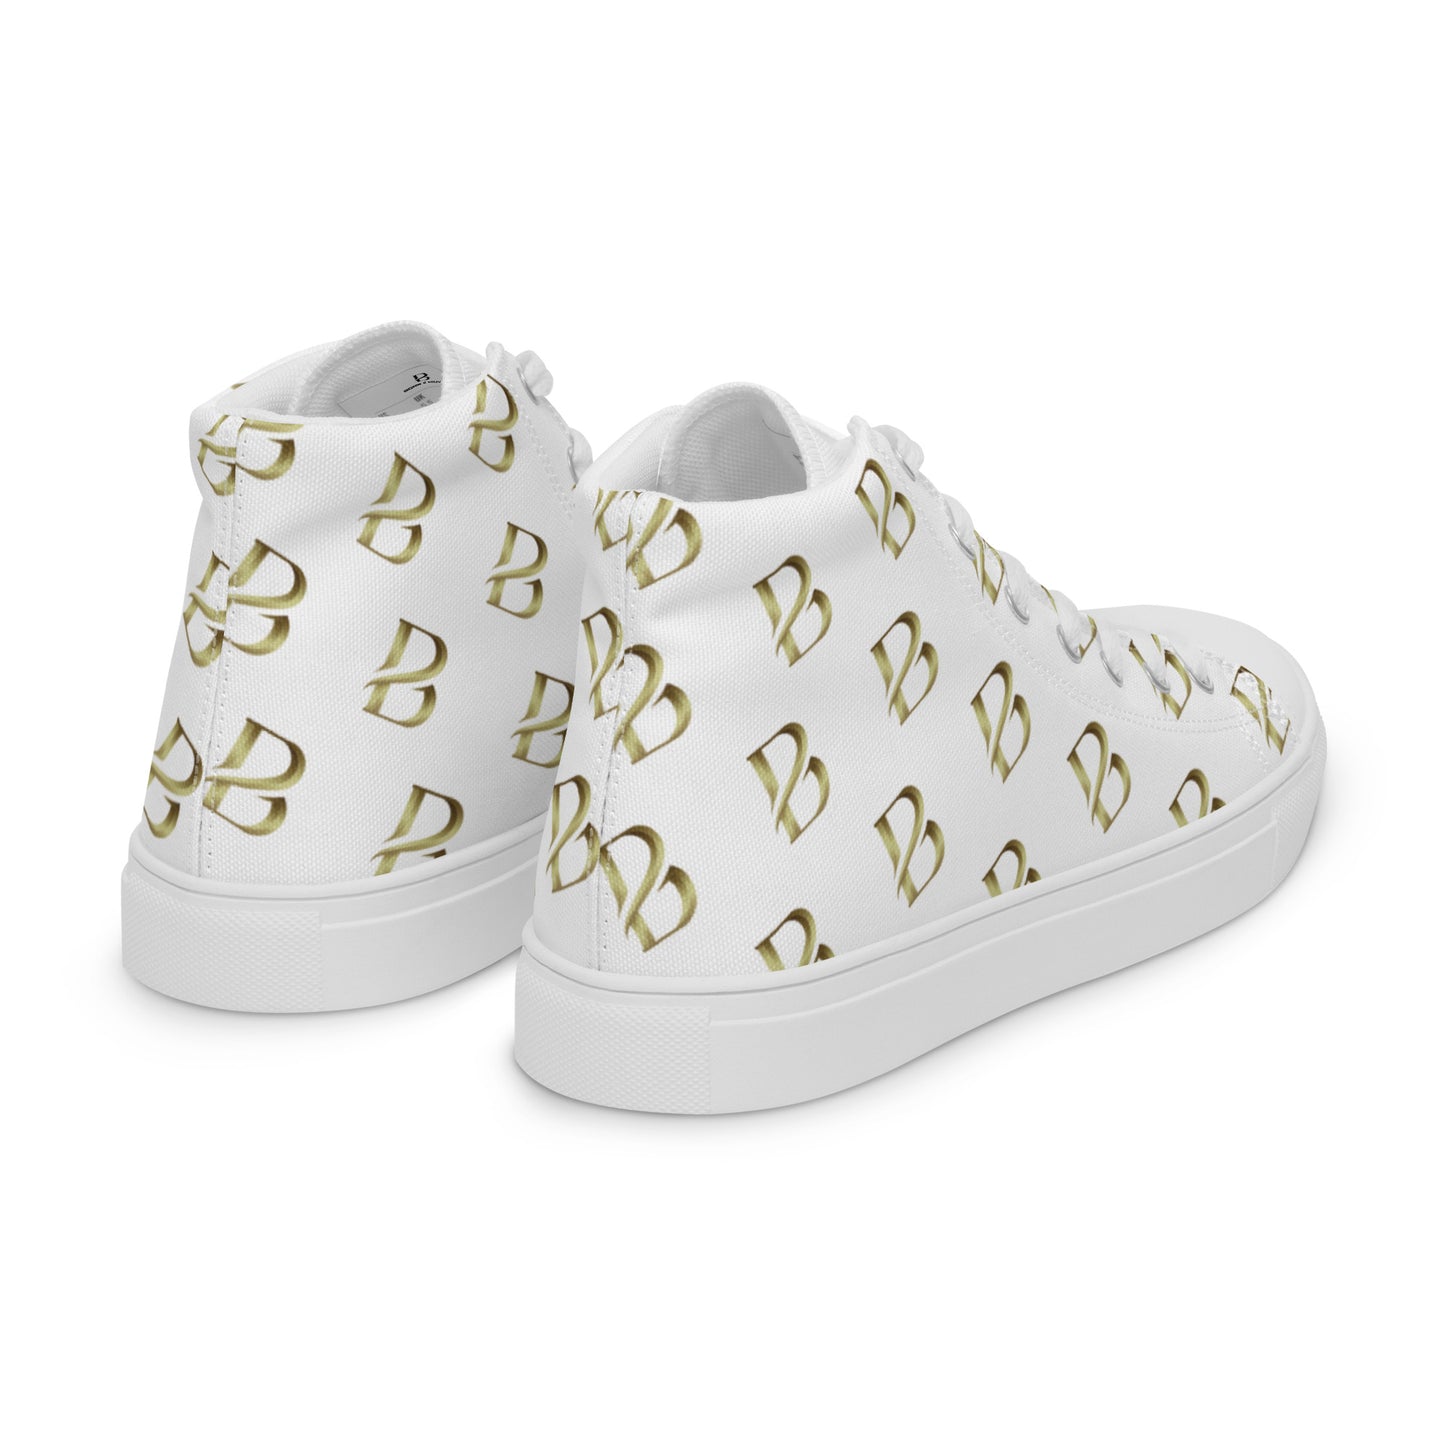 Gold Logo Born to Move "B"  Women’s High Top Canvas Shoes